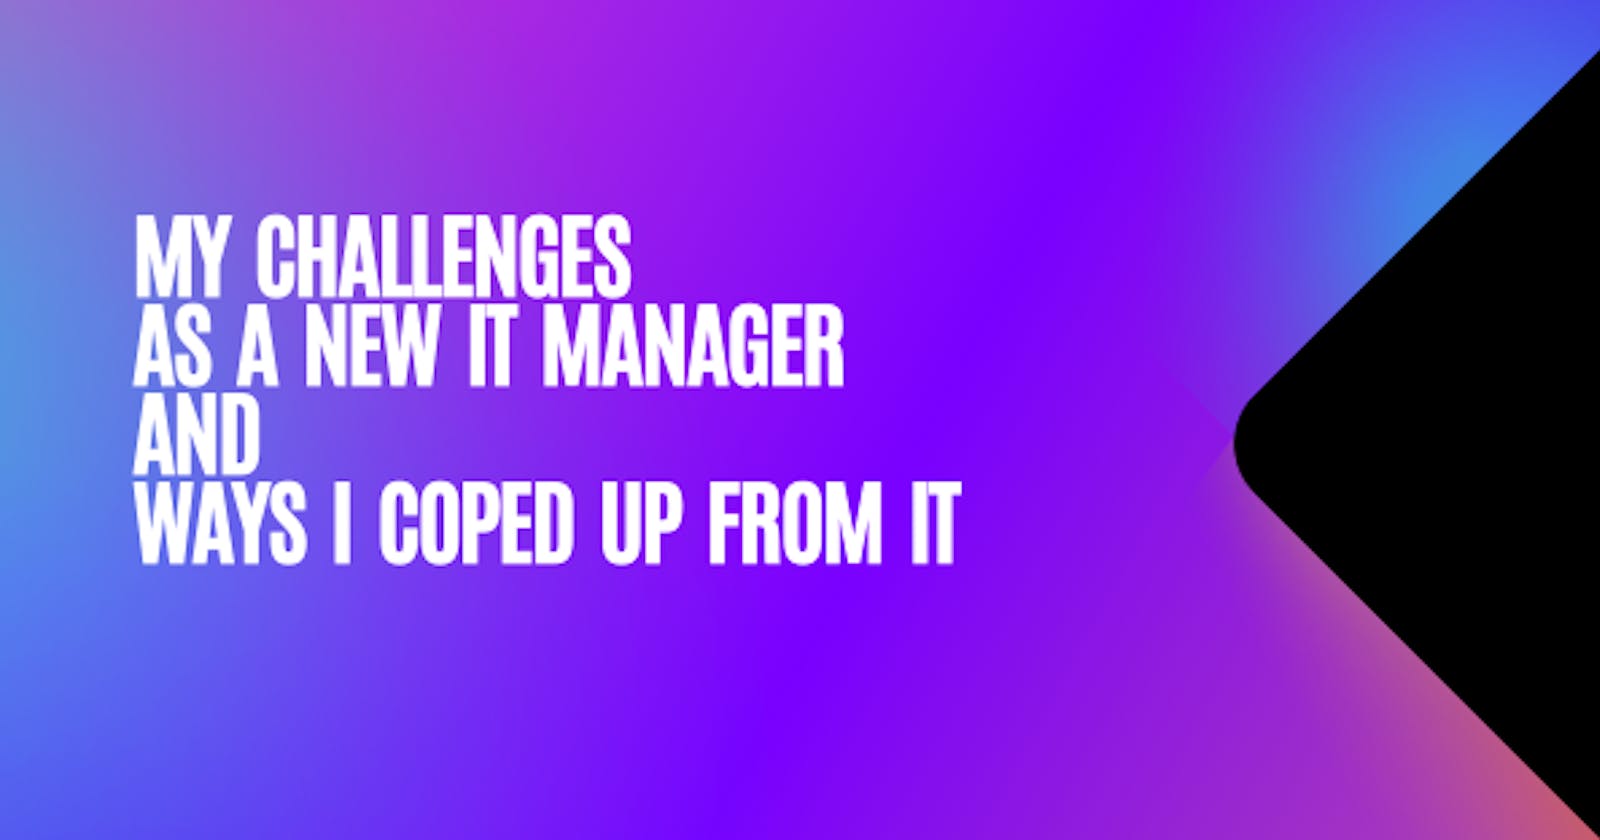 My Challenges As A New IT Manager And Ways I Coped Up From It